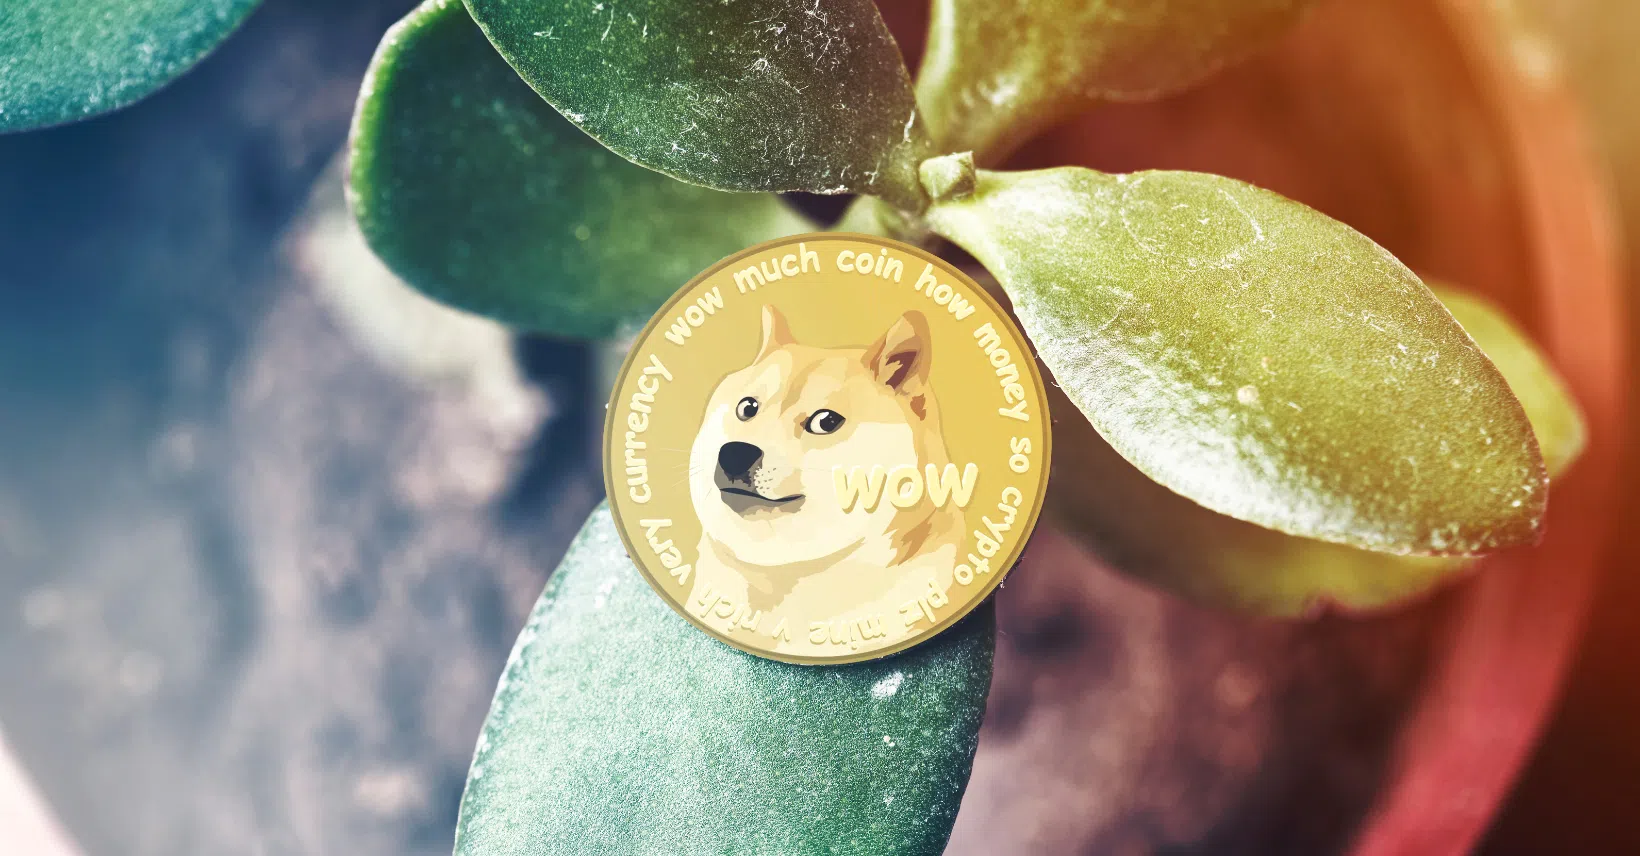 Dogecoin reduces CO2 emissions by 25%